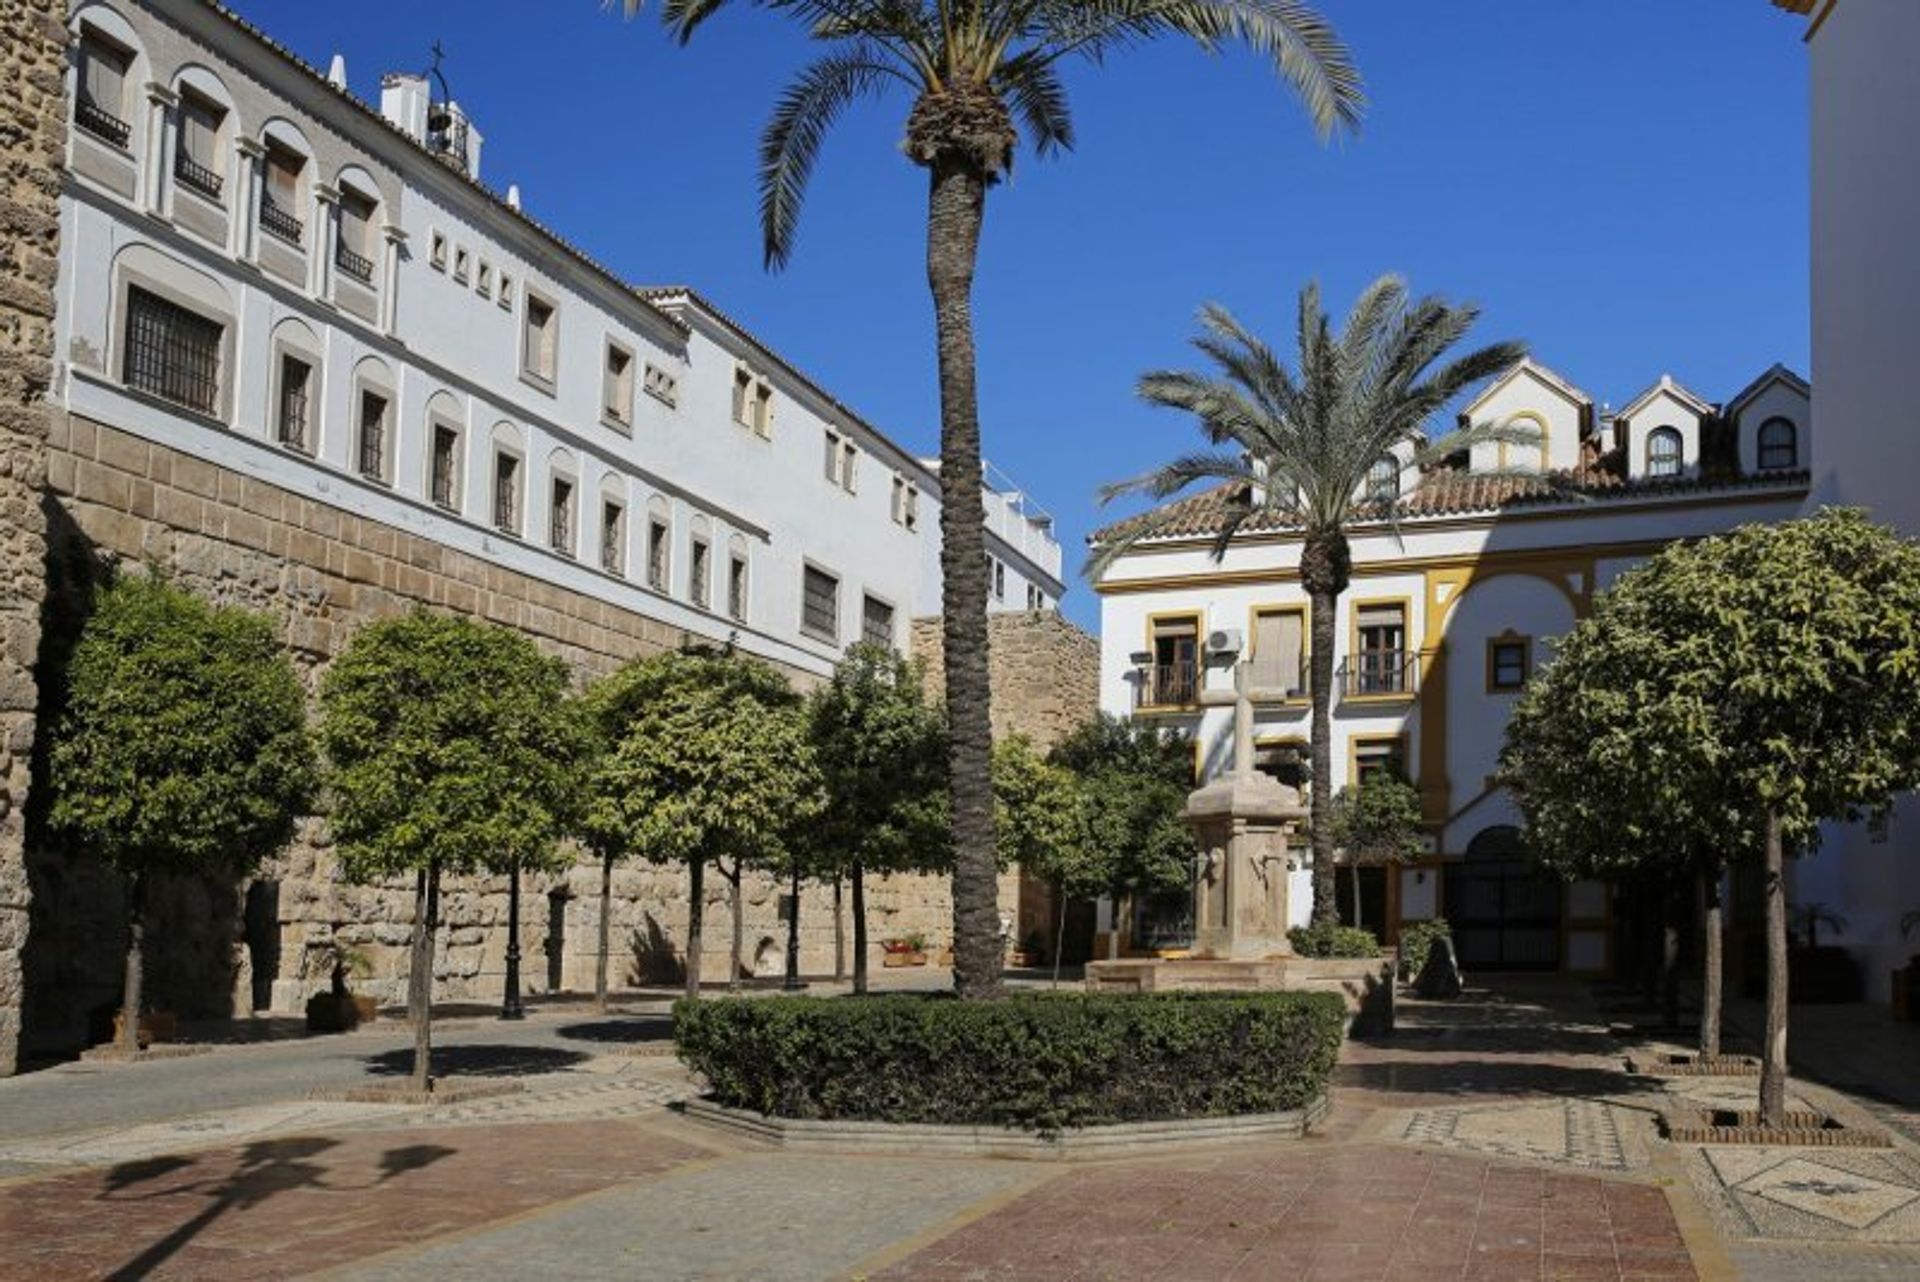 The old town of Marbella is a perfect place to discover its rich past and interesting architecture